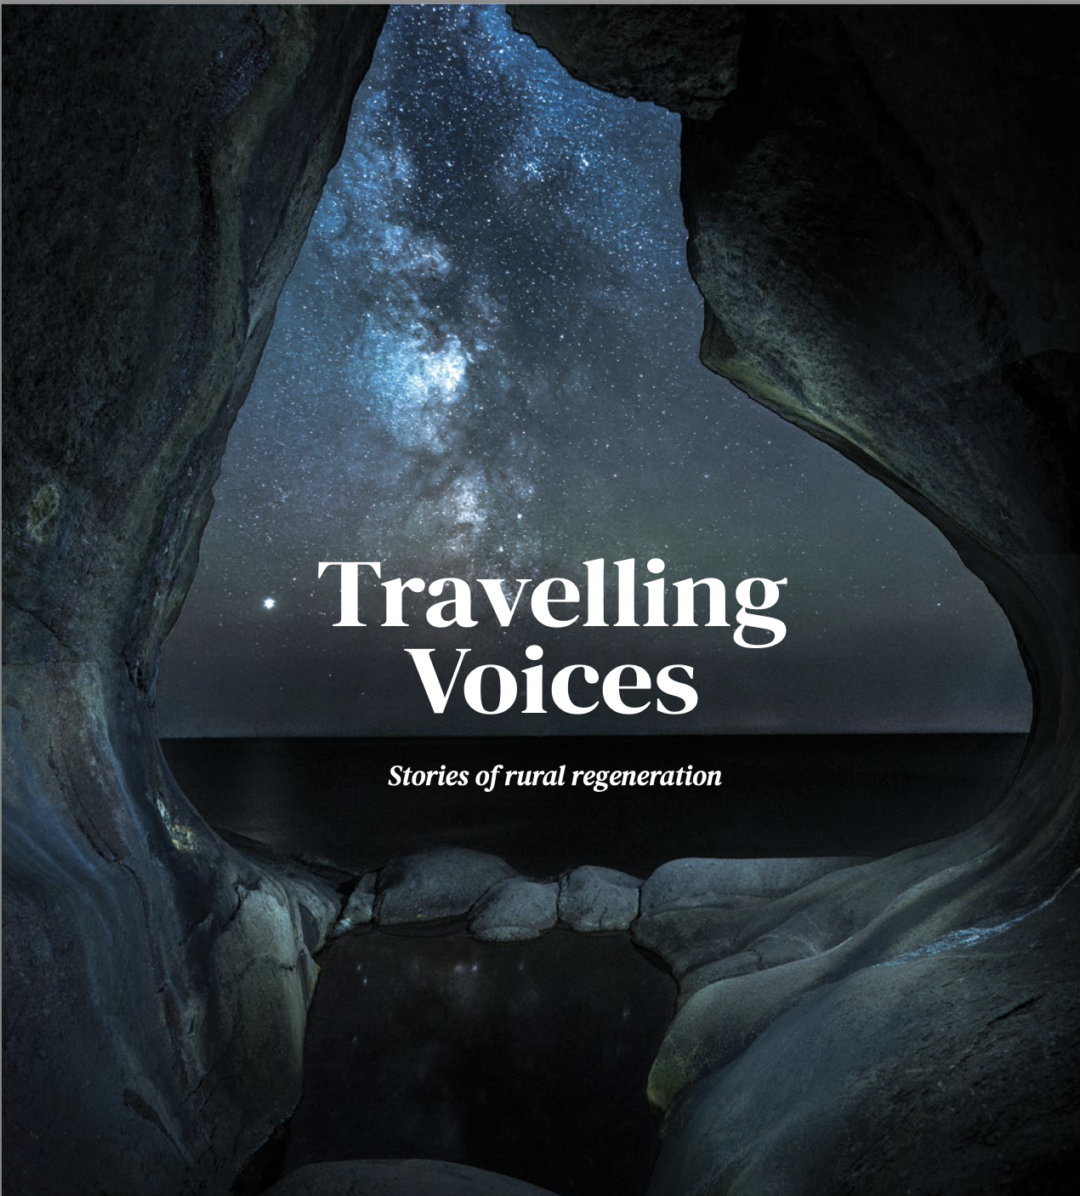 Travelling voices